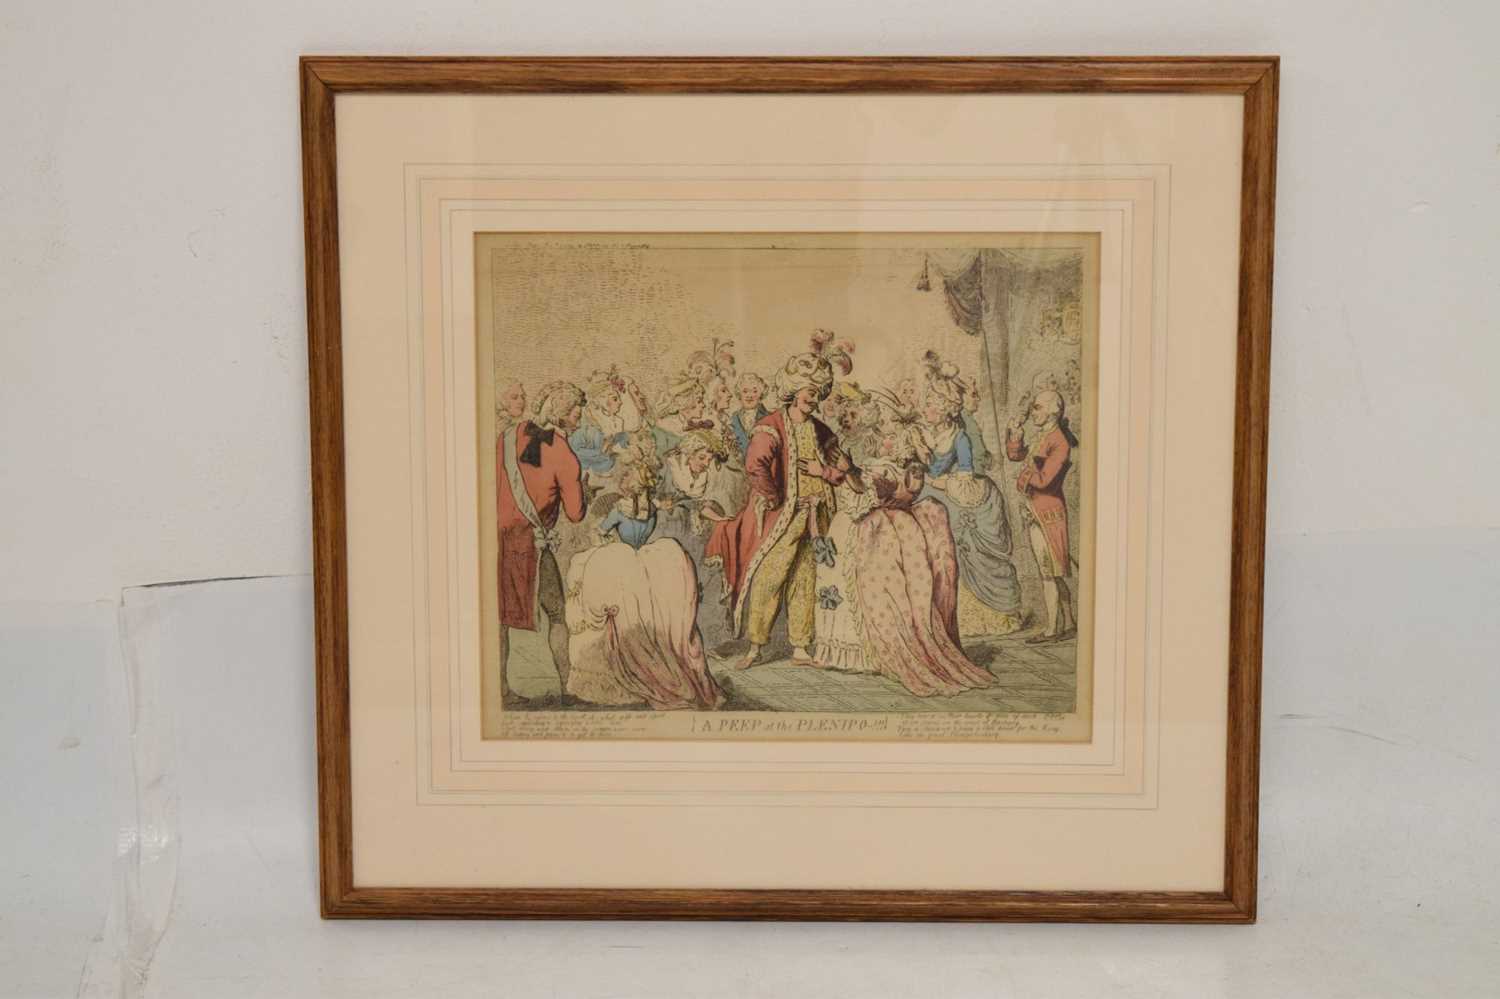 Late 18th century coloured print - 'A Peep at the Plenipo-!!!' - Image 6 of 8